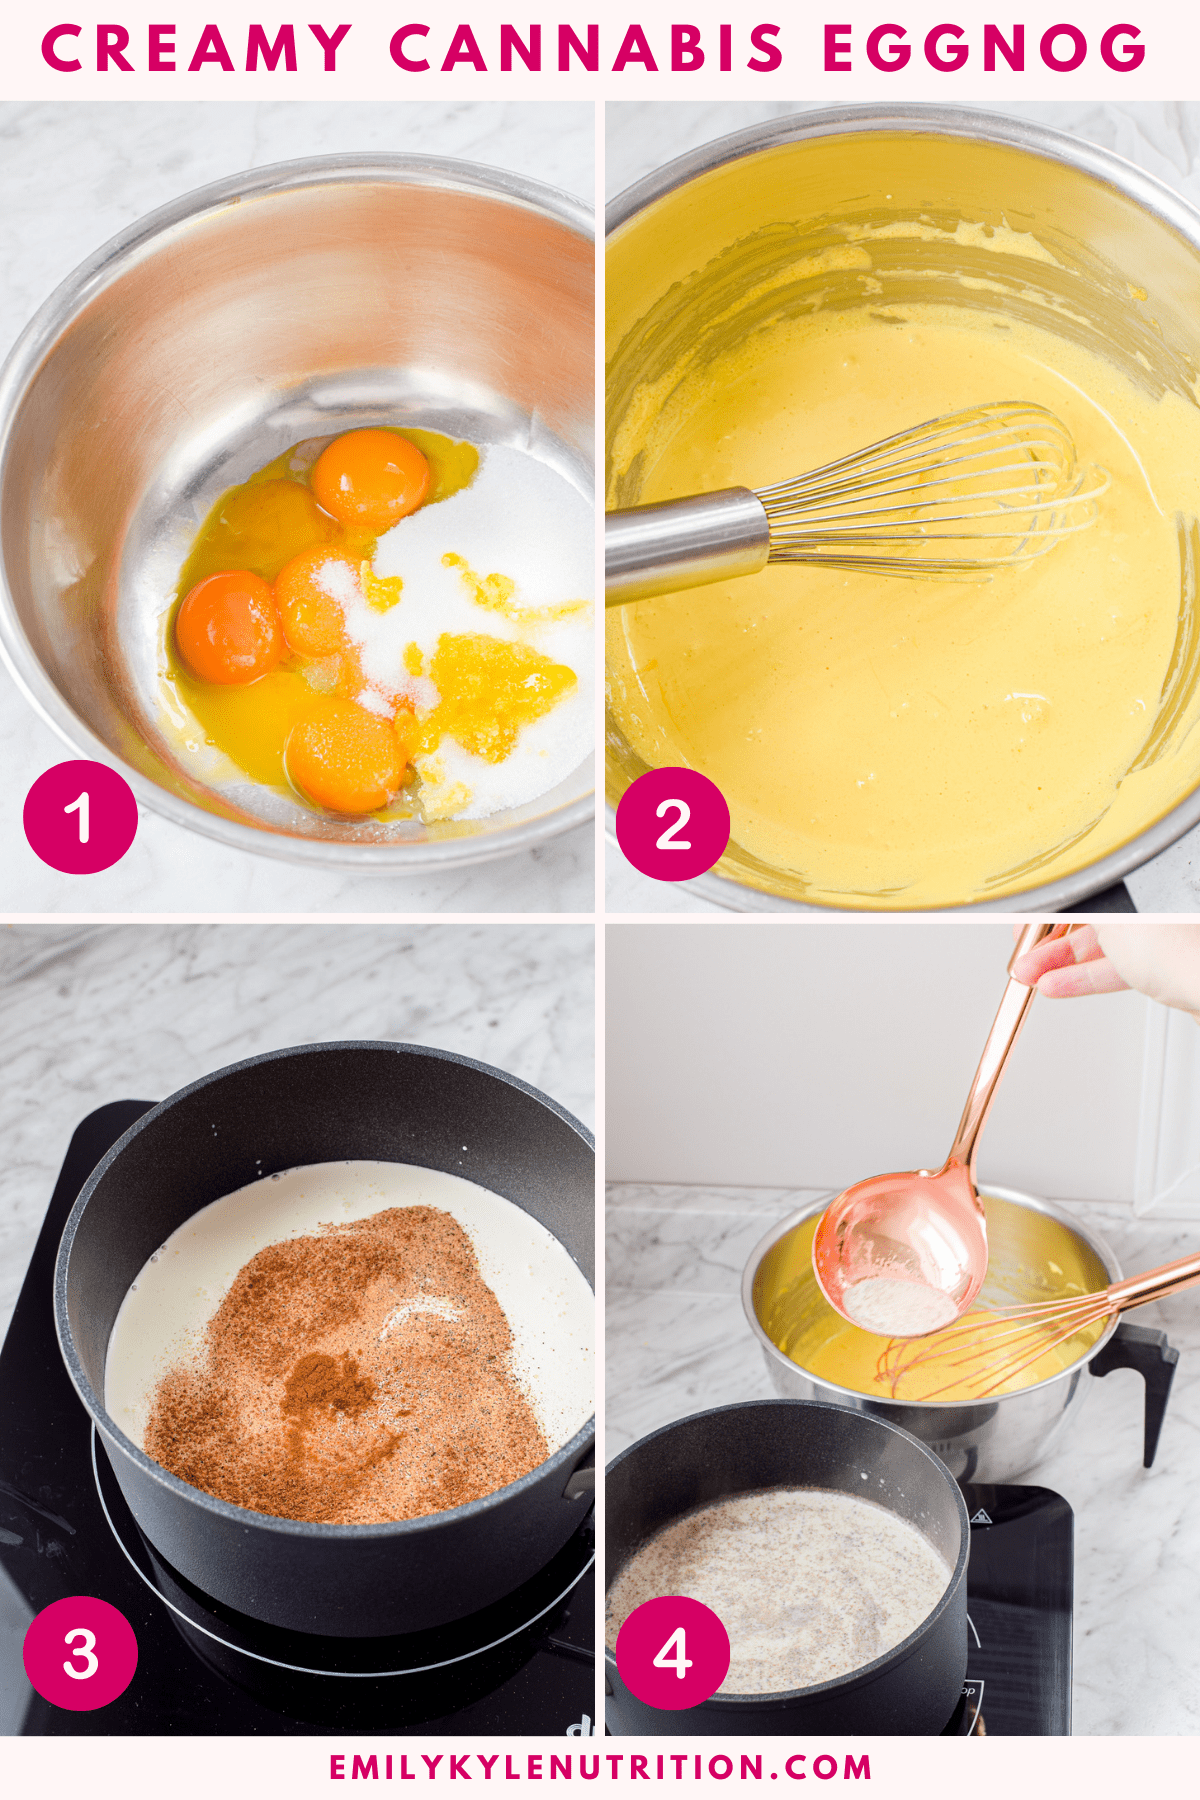 A four step image collage showing the steps to make cannabis eggnog